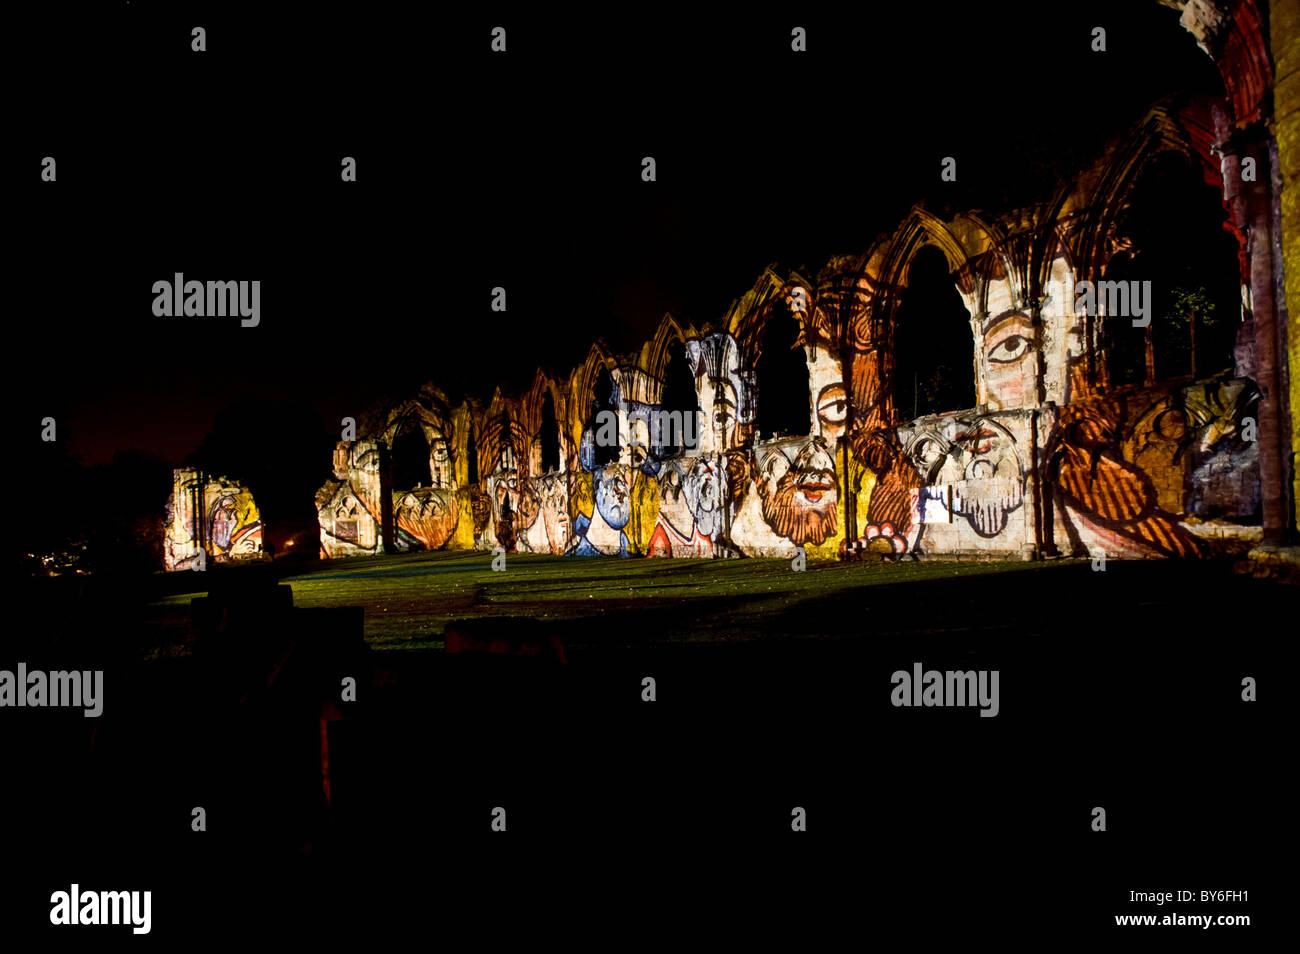 Medieval artwork projected onto the ruins of St Mary's Abbey at night. Stock Photo